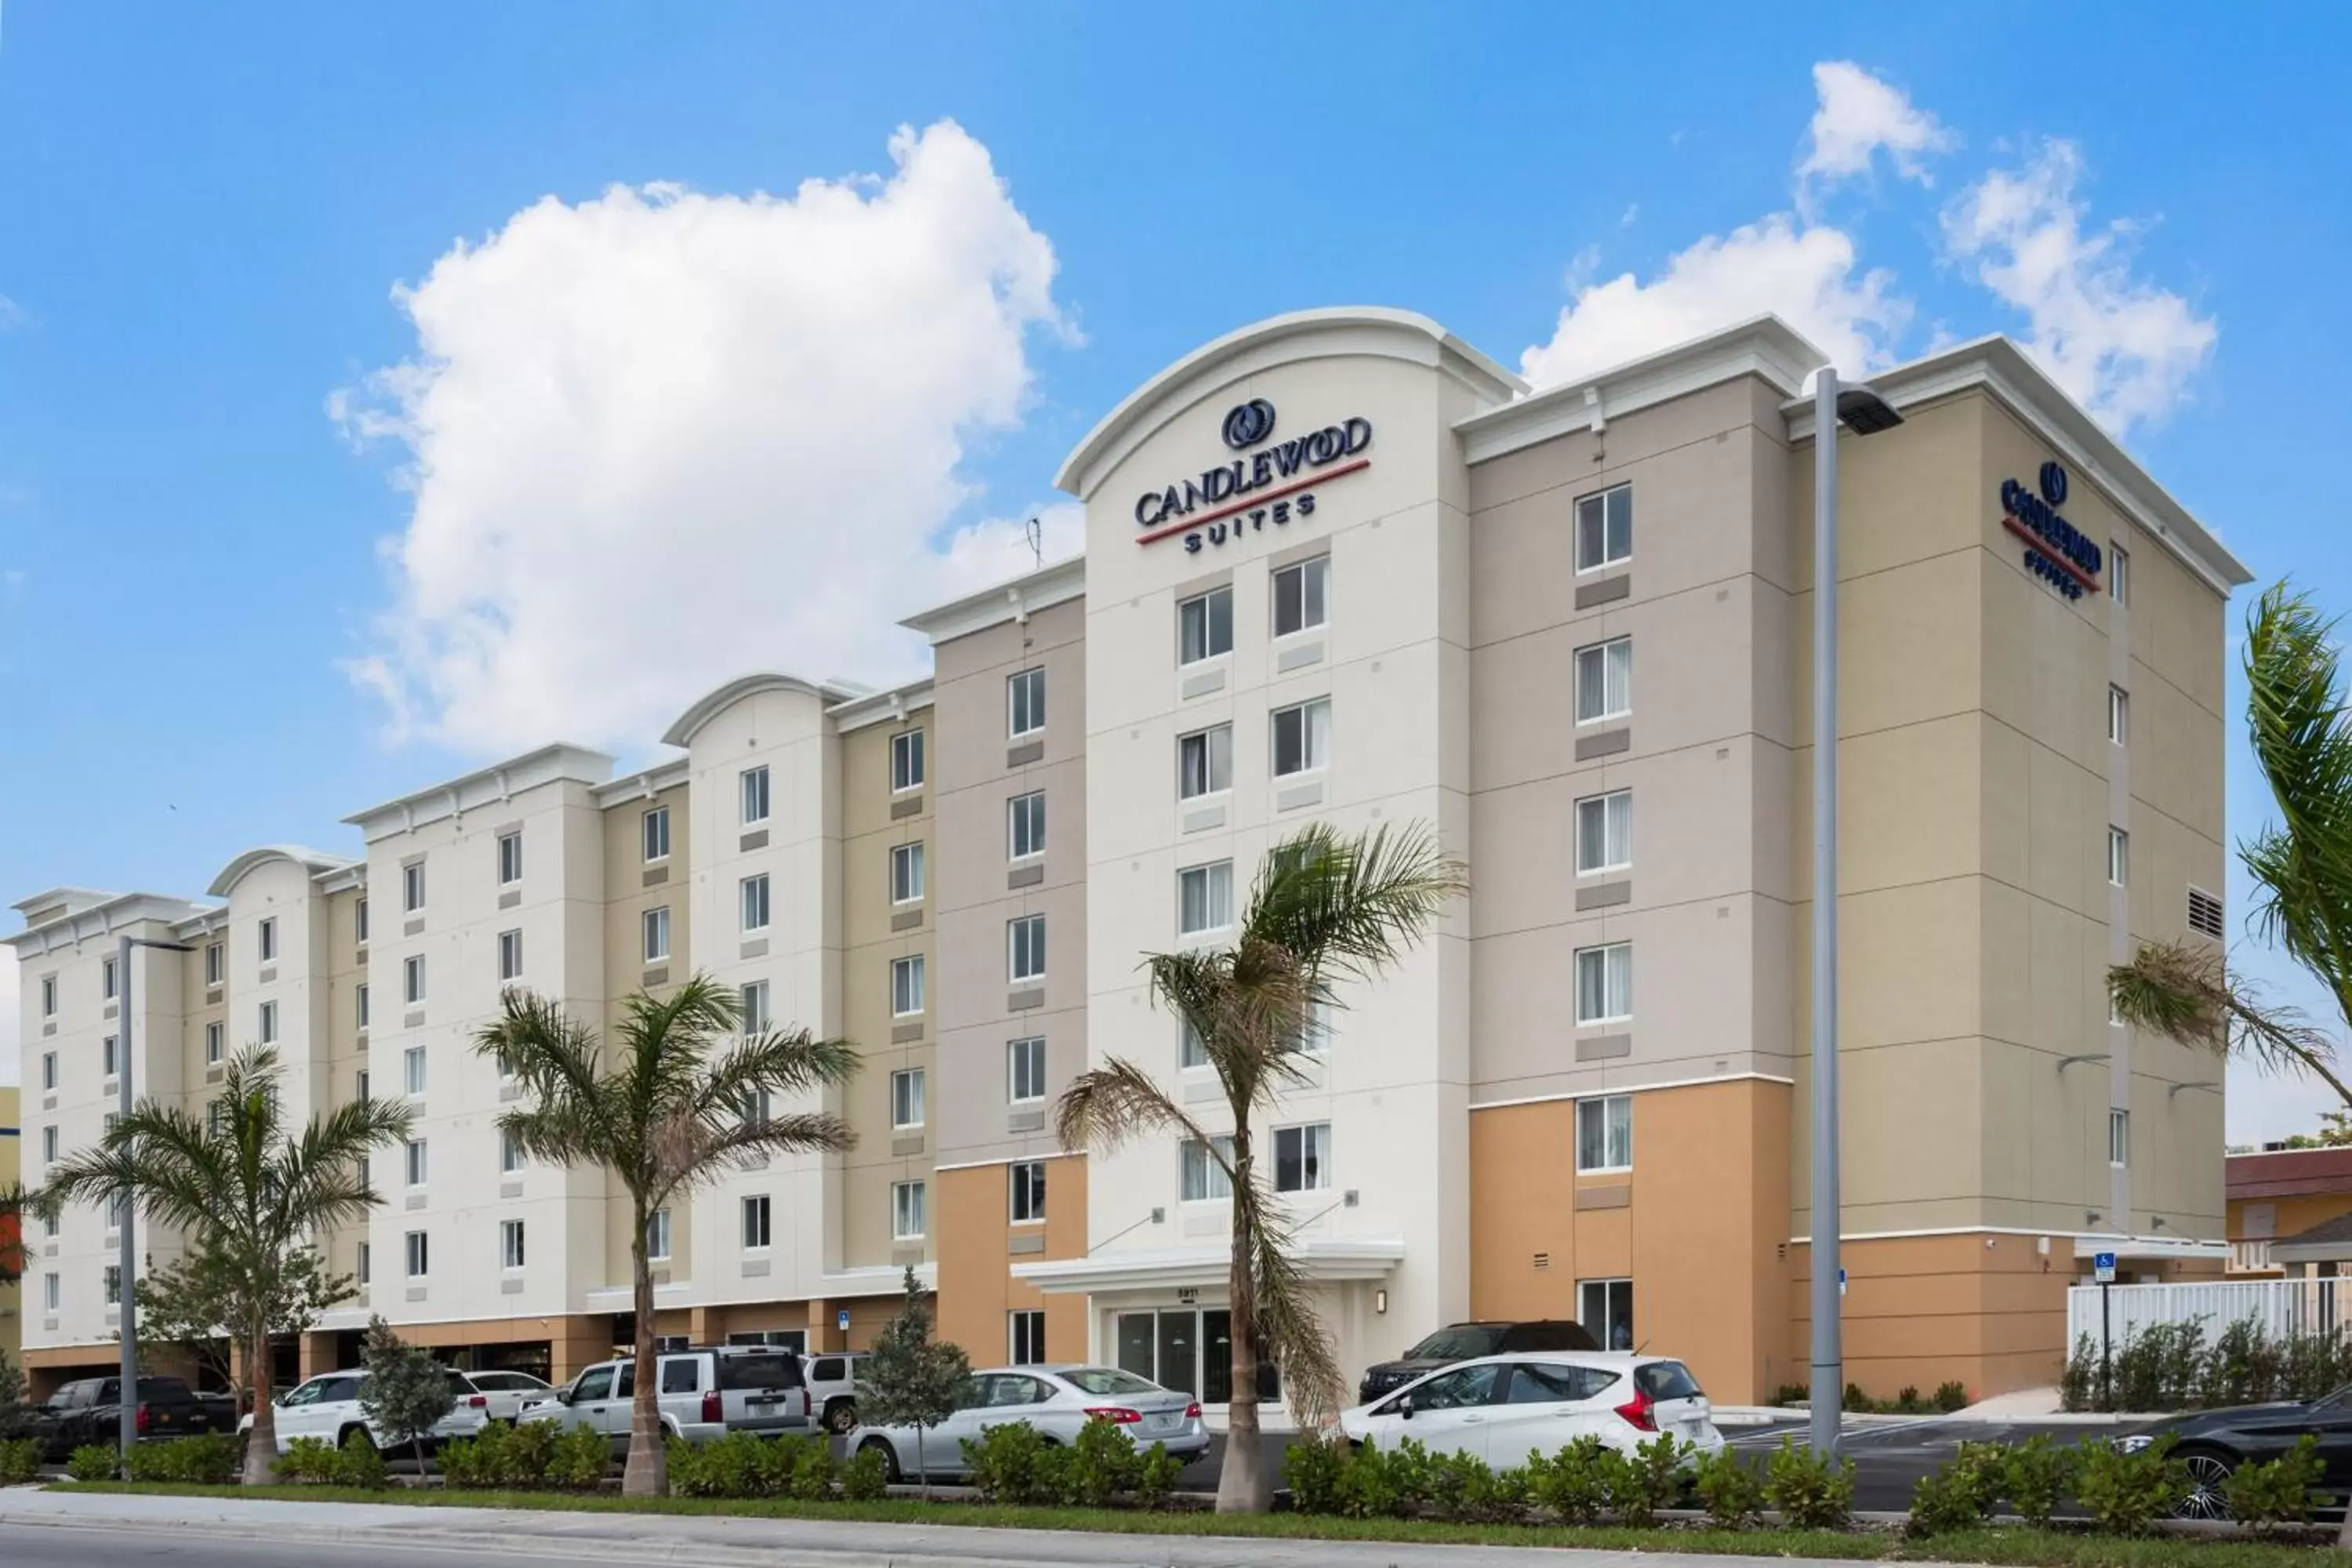 Property Building in Candlewood Suites Miami Intl Airport - 36th St, an IHG Hotel